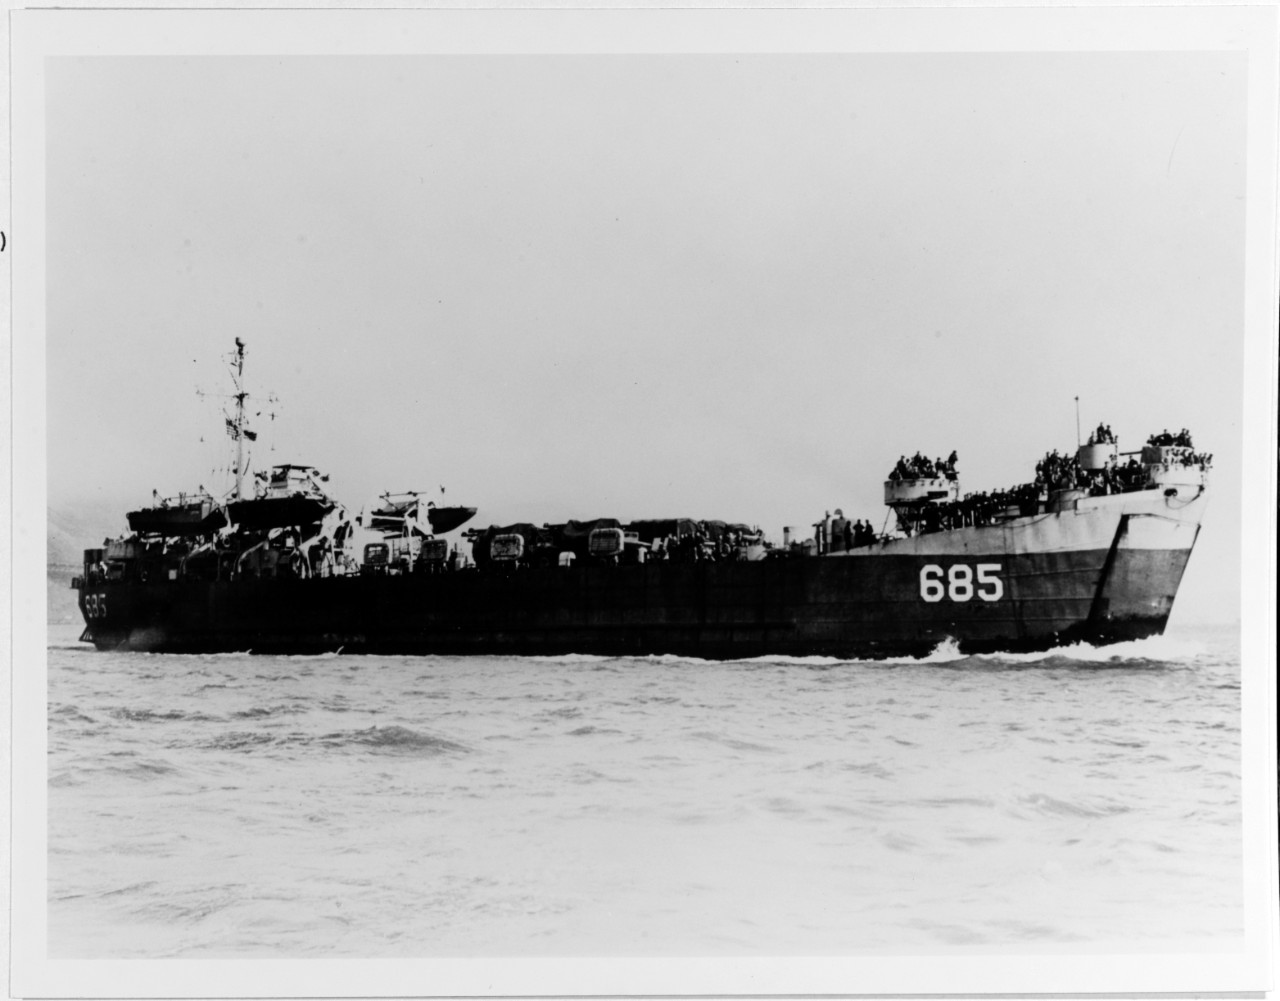 USS LST-685 (later:  CURRY COUNTY)